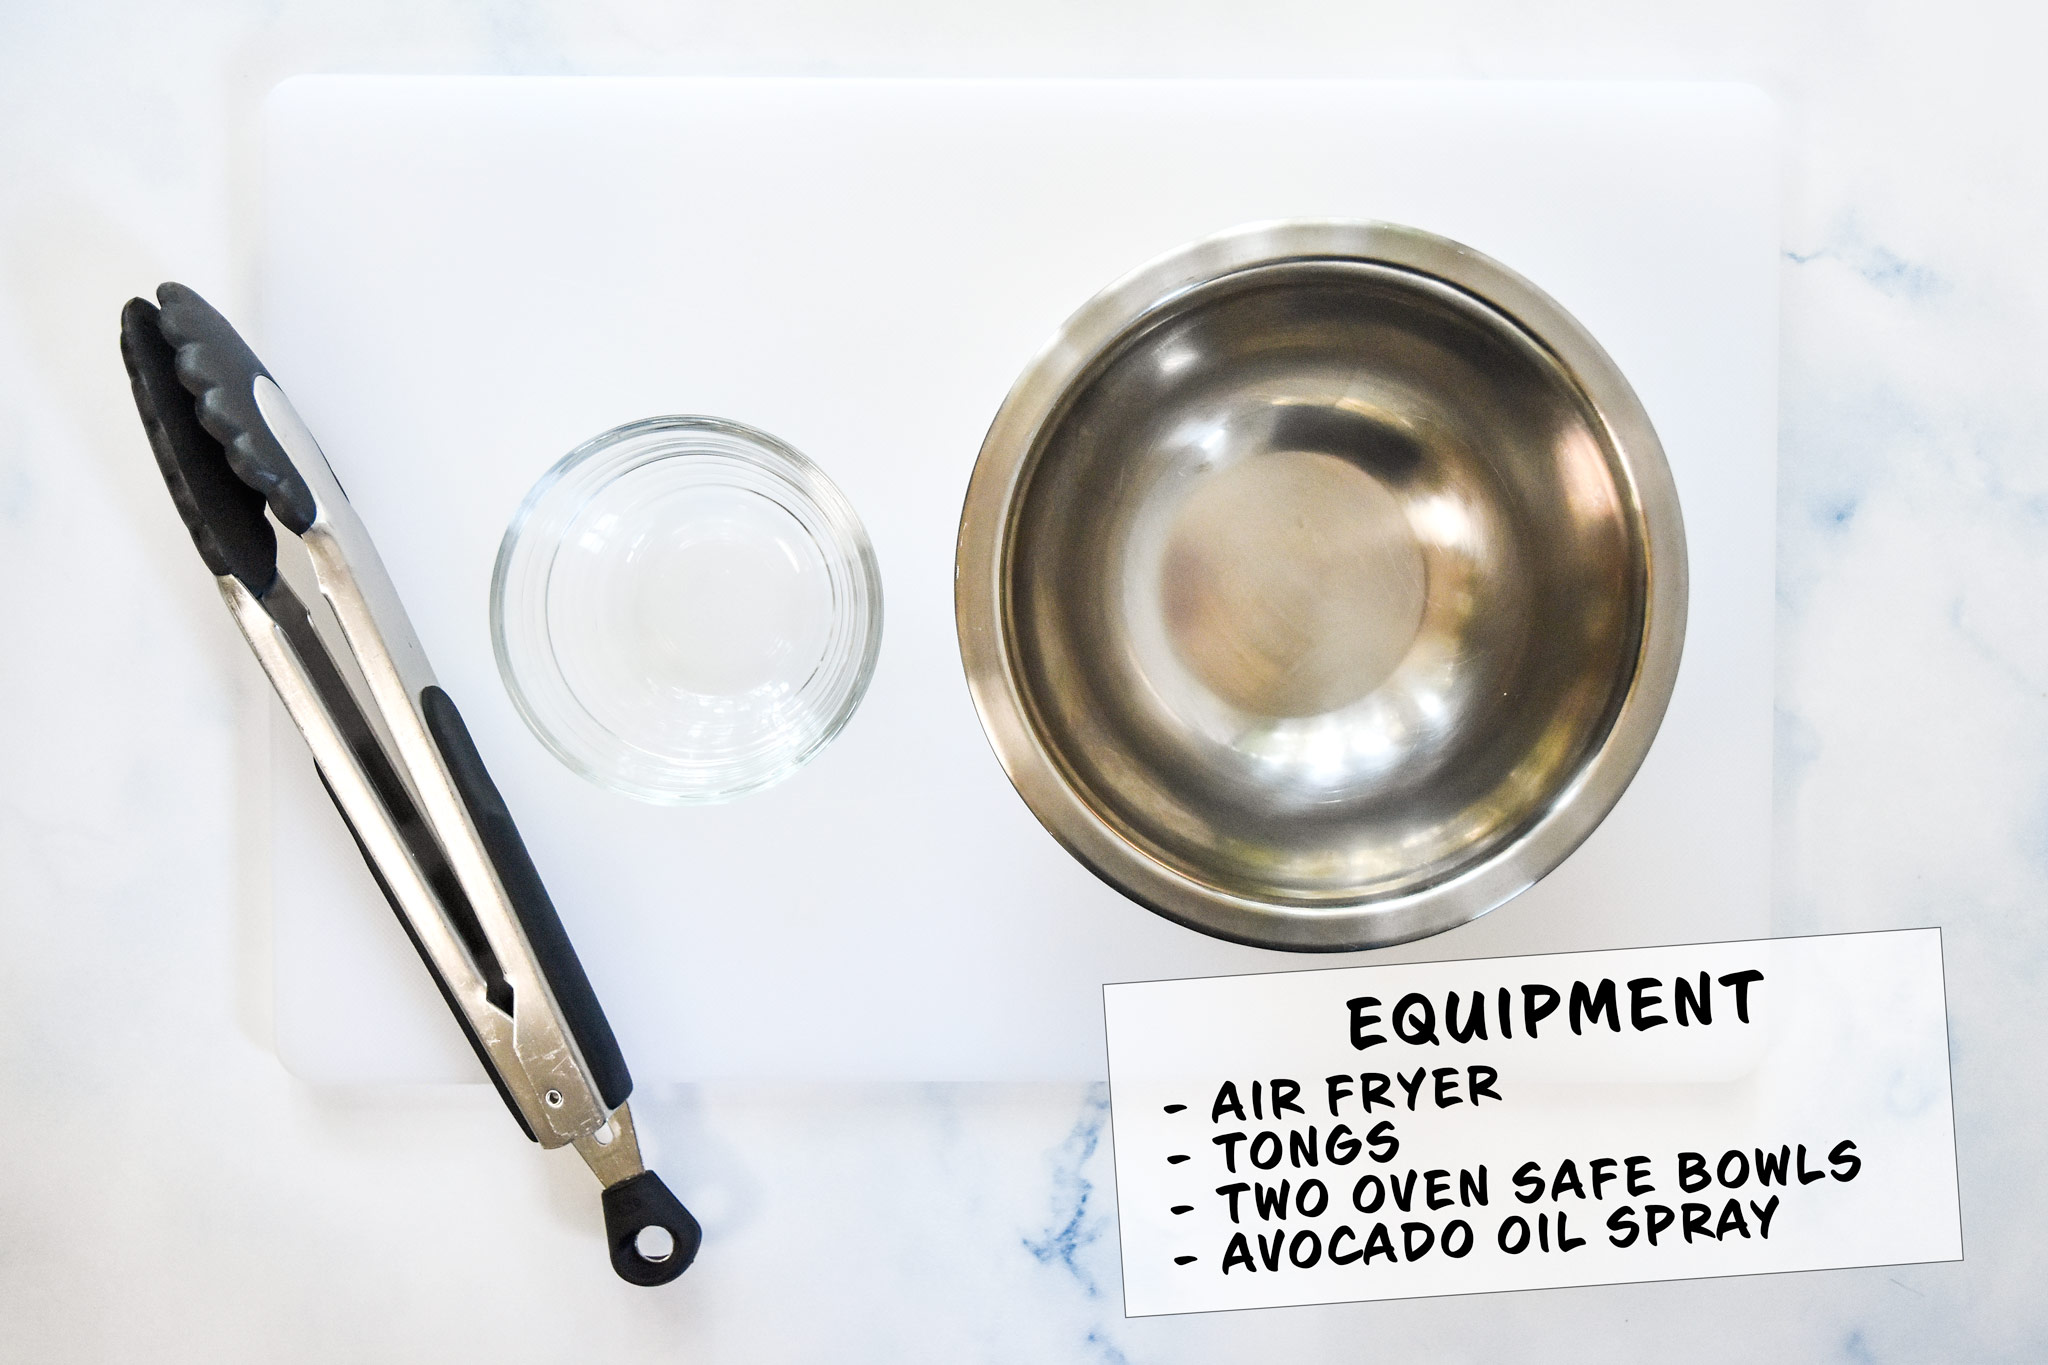 equipment for making air fryer flour tortilla bowls including tongs and oven safe bowls